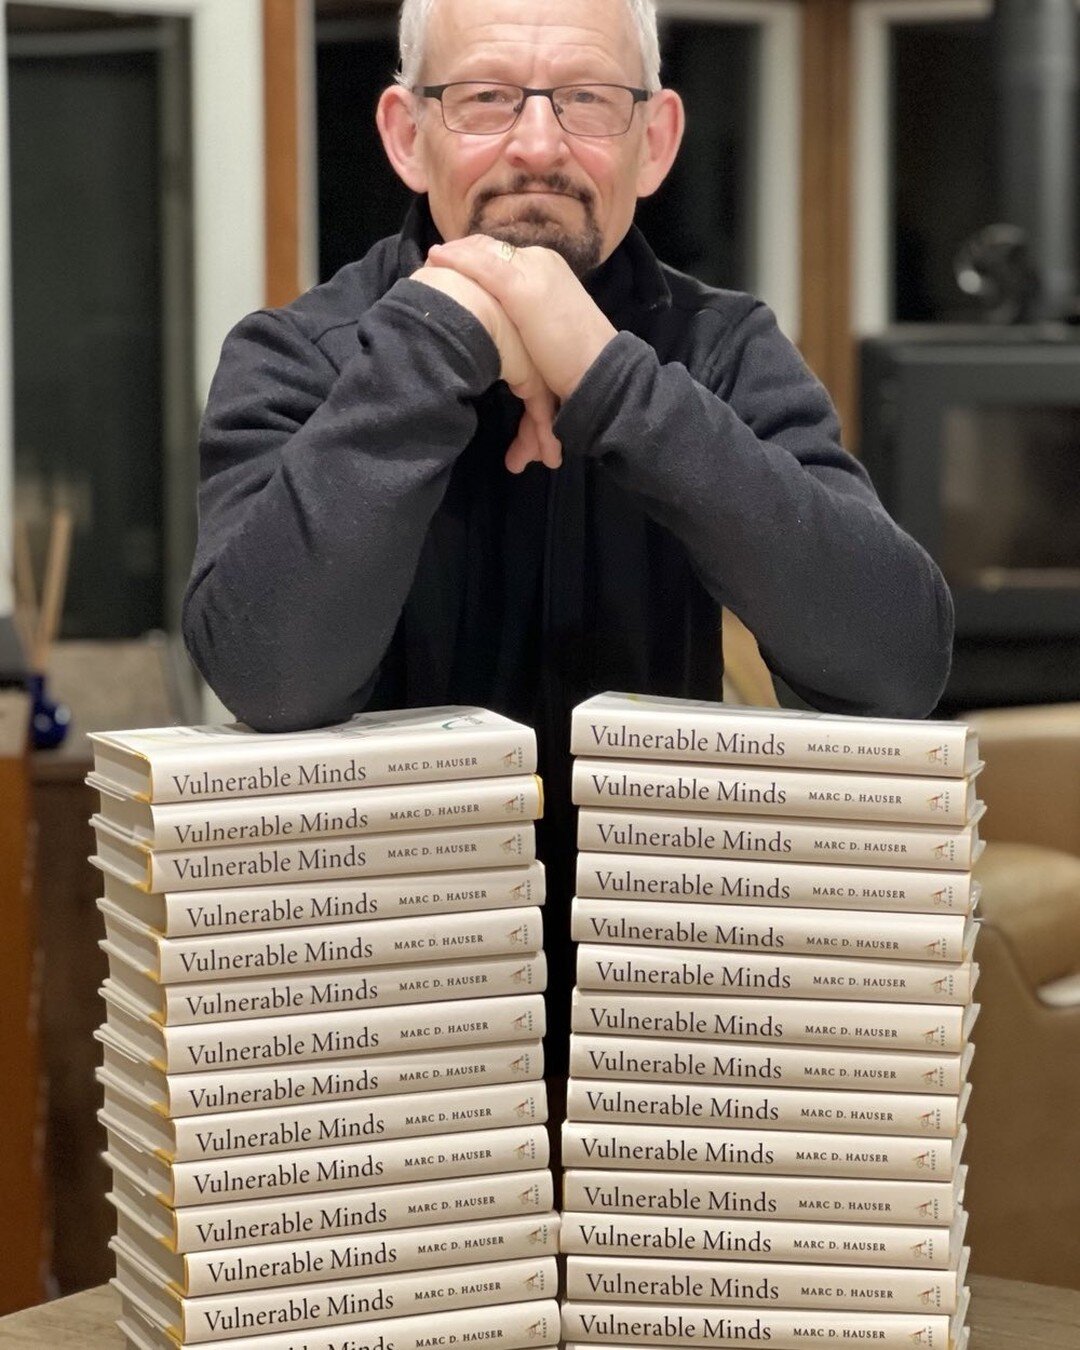 My new book, Vulnerable Minds, is out today! https://marcdhauser.com/news-contexts/vulnerable-minds